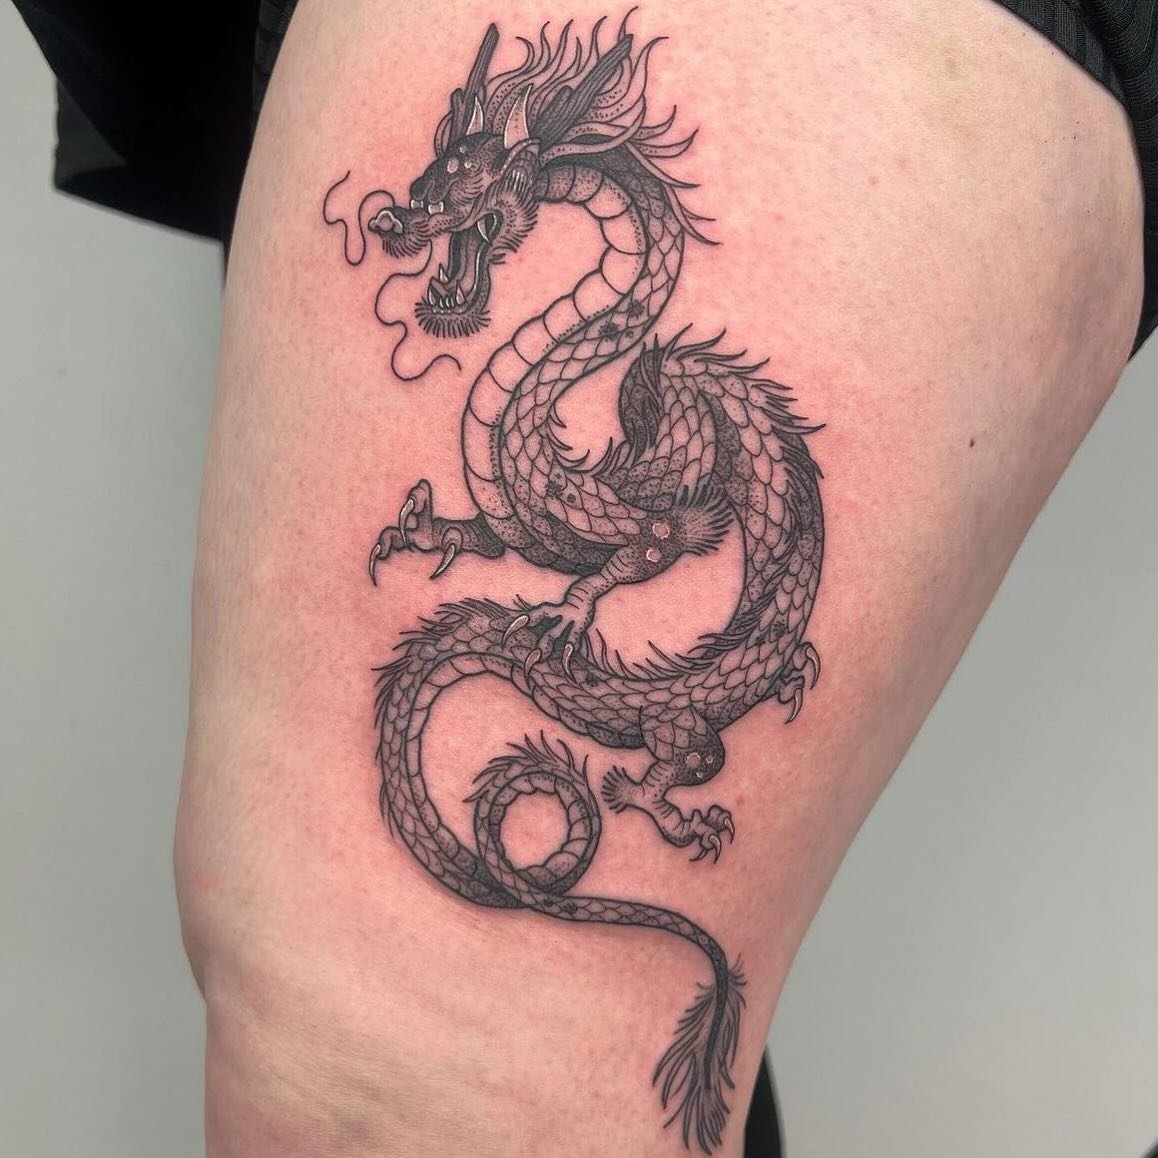 By @jessicabrowntattoo email Jess to book! Jessbrowntattoo@yahoo.co.uk 🐉 #dragontattoo #dragon #thightattoo